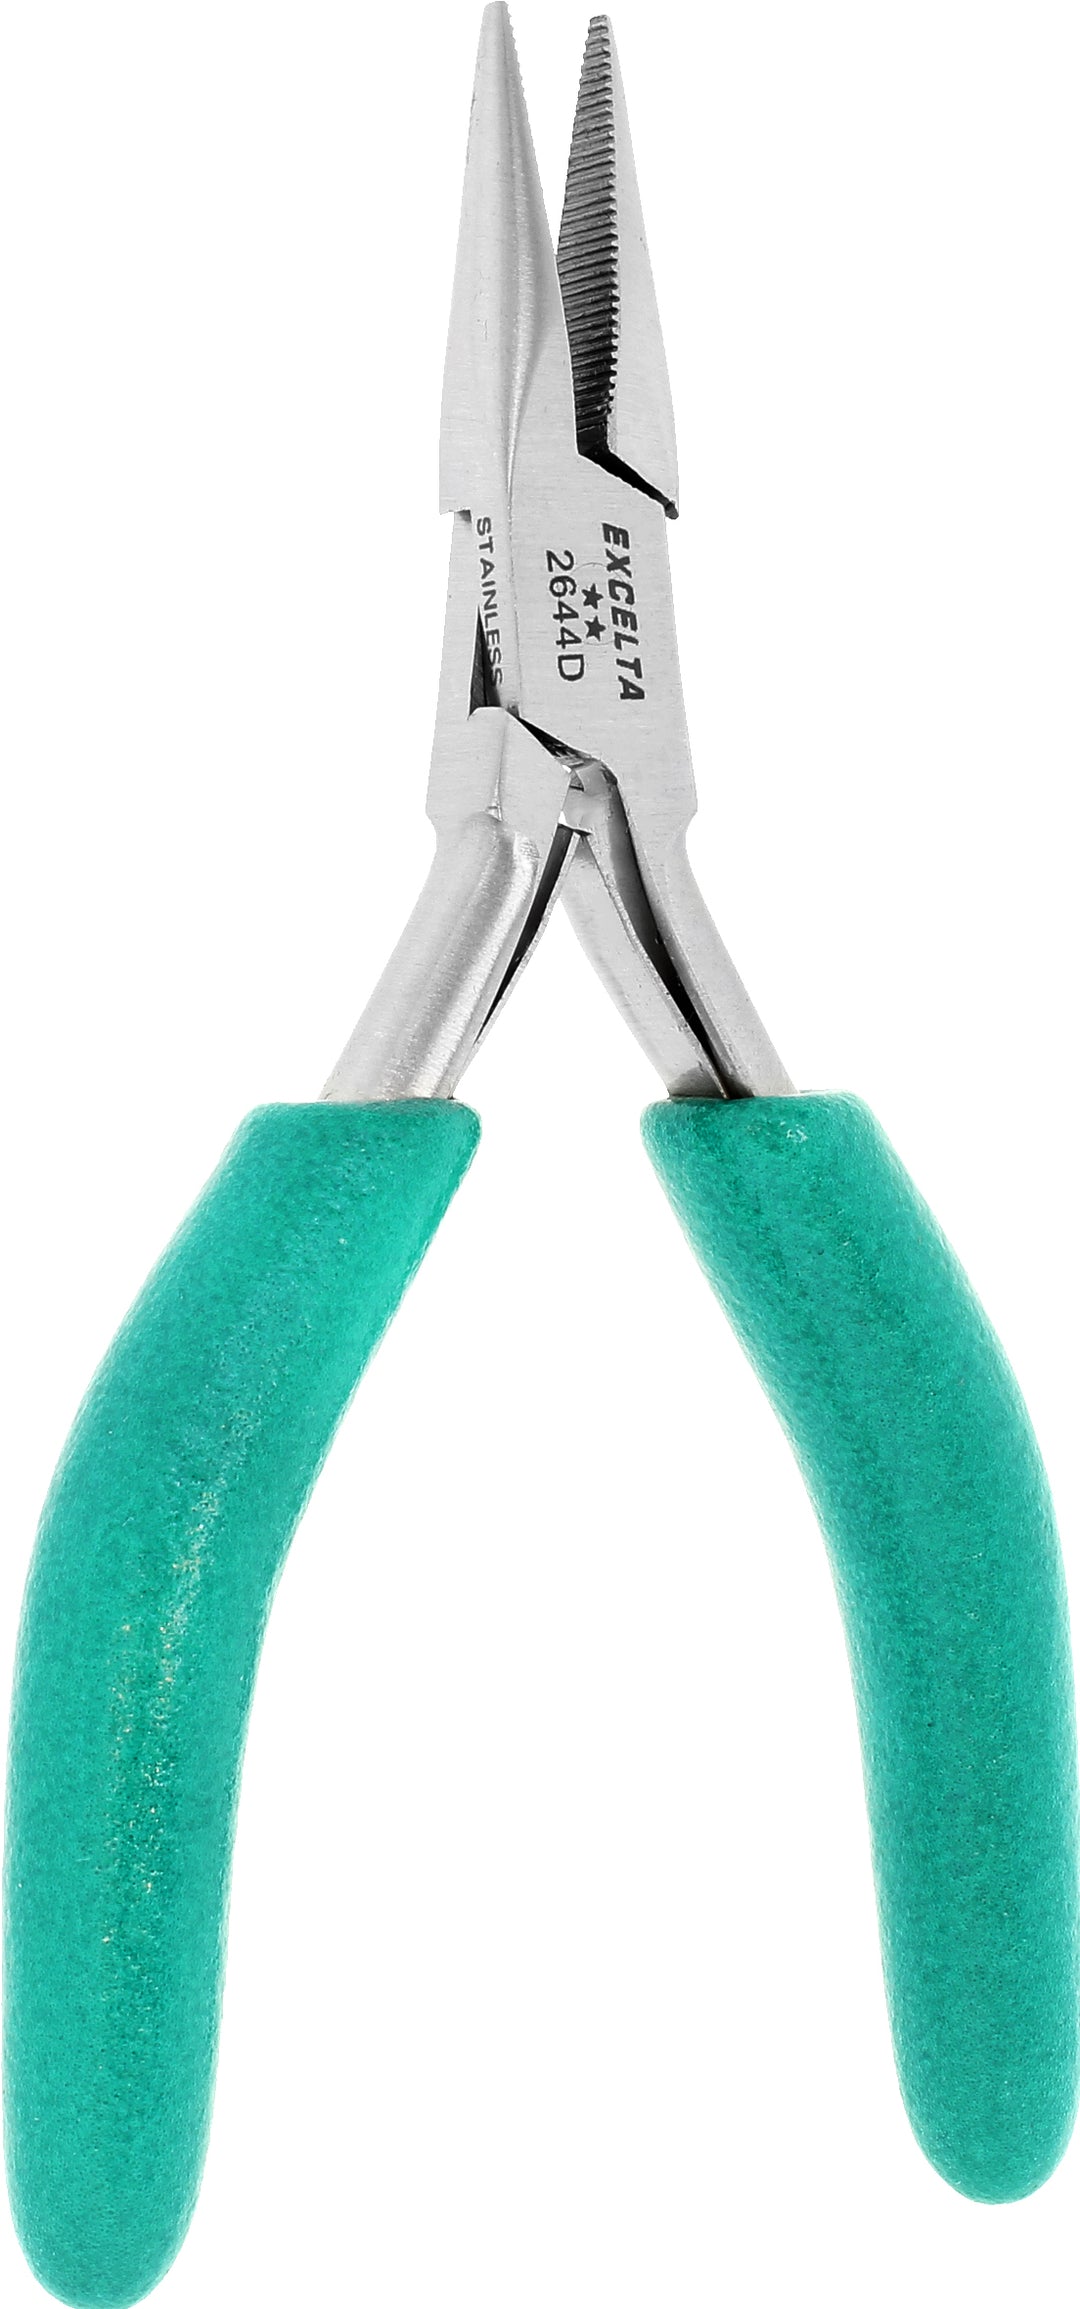 Excelta 2644D Pliers - 2 Star Small Chain Nose - SS - Serrated Jaws